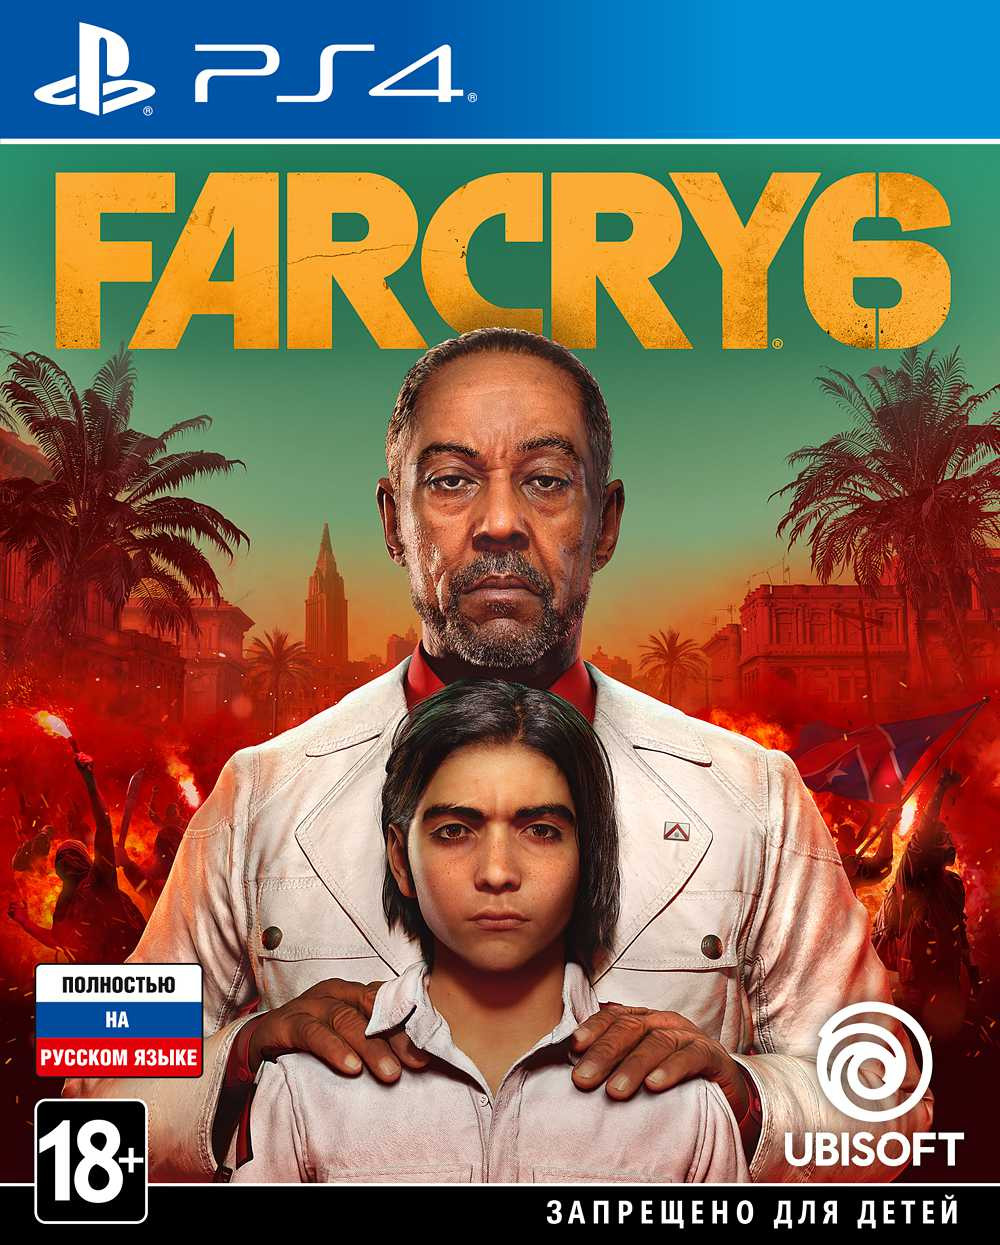  Far Cry 6 Castillo Ubisoft Heroes ( PS4 + )